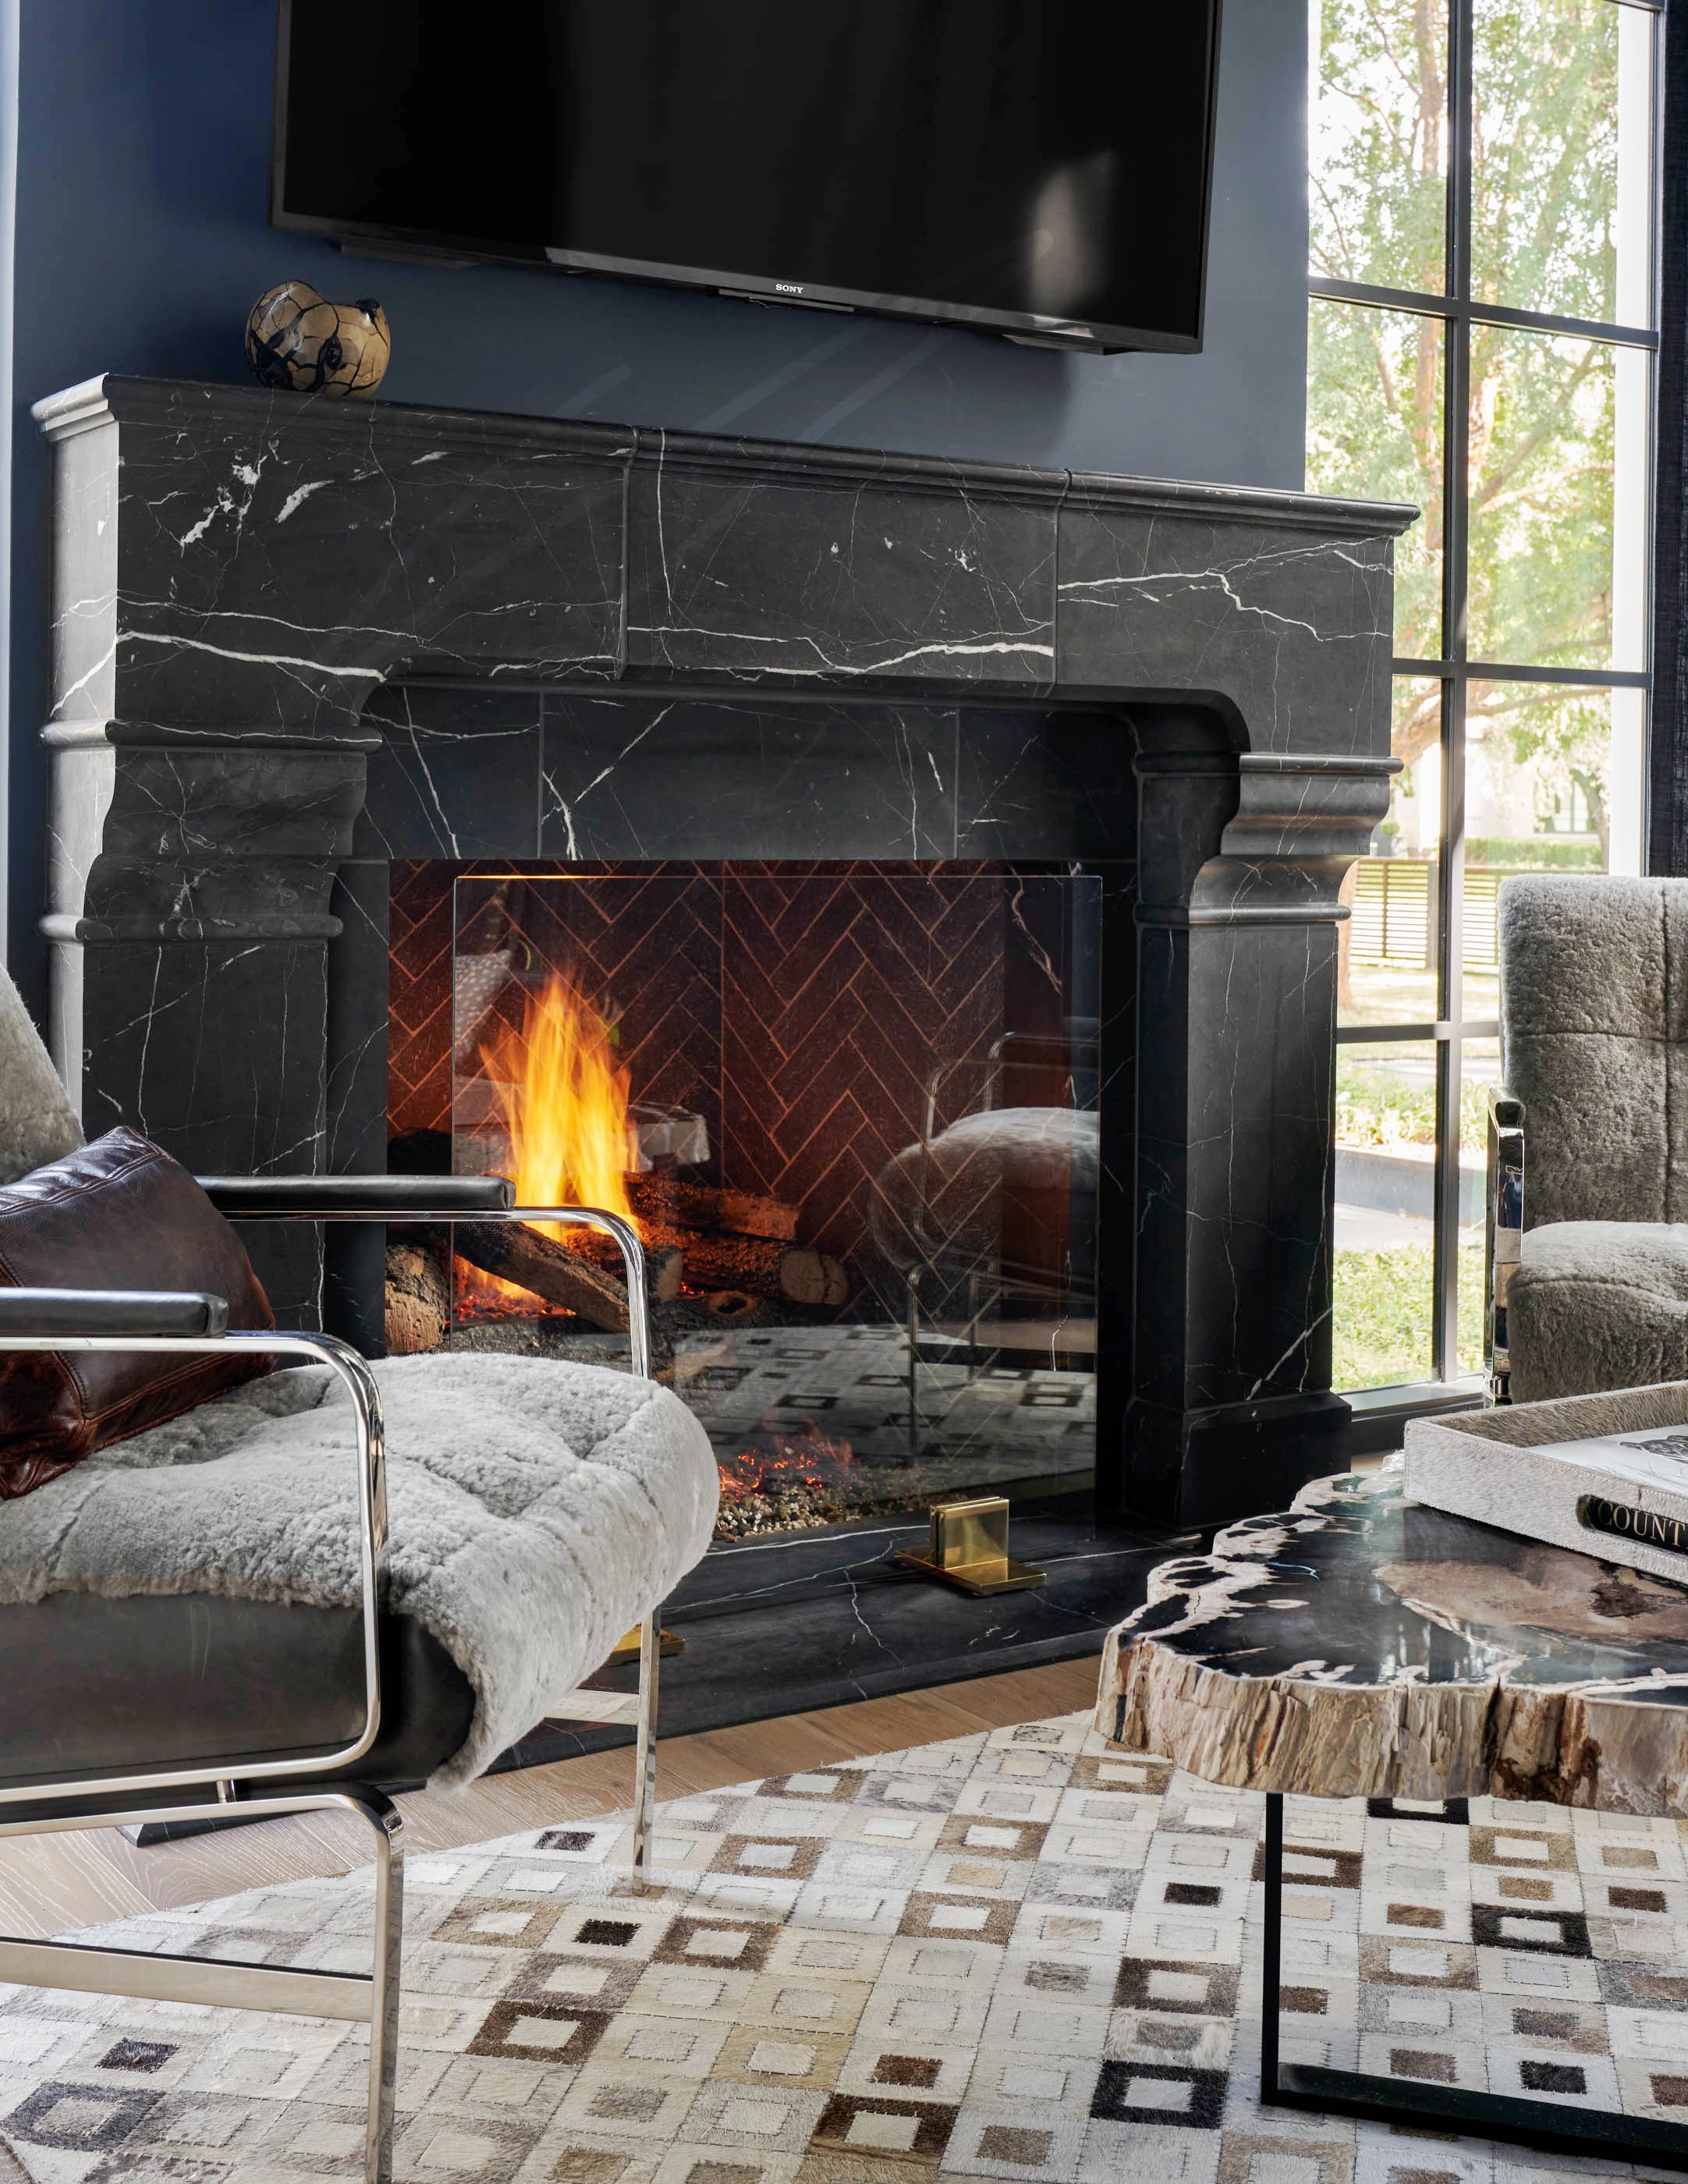 *Note: This screen is best for gas burning fireplaces only.

The Quinn Fireplace Screen's tempered glass panel allows the fire to be enjoyed while protecting the surrounding area from heat and sparks. The brass block feet provide elegant support for